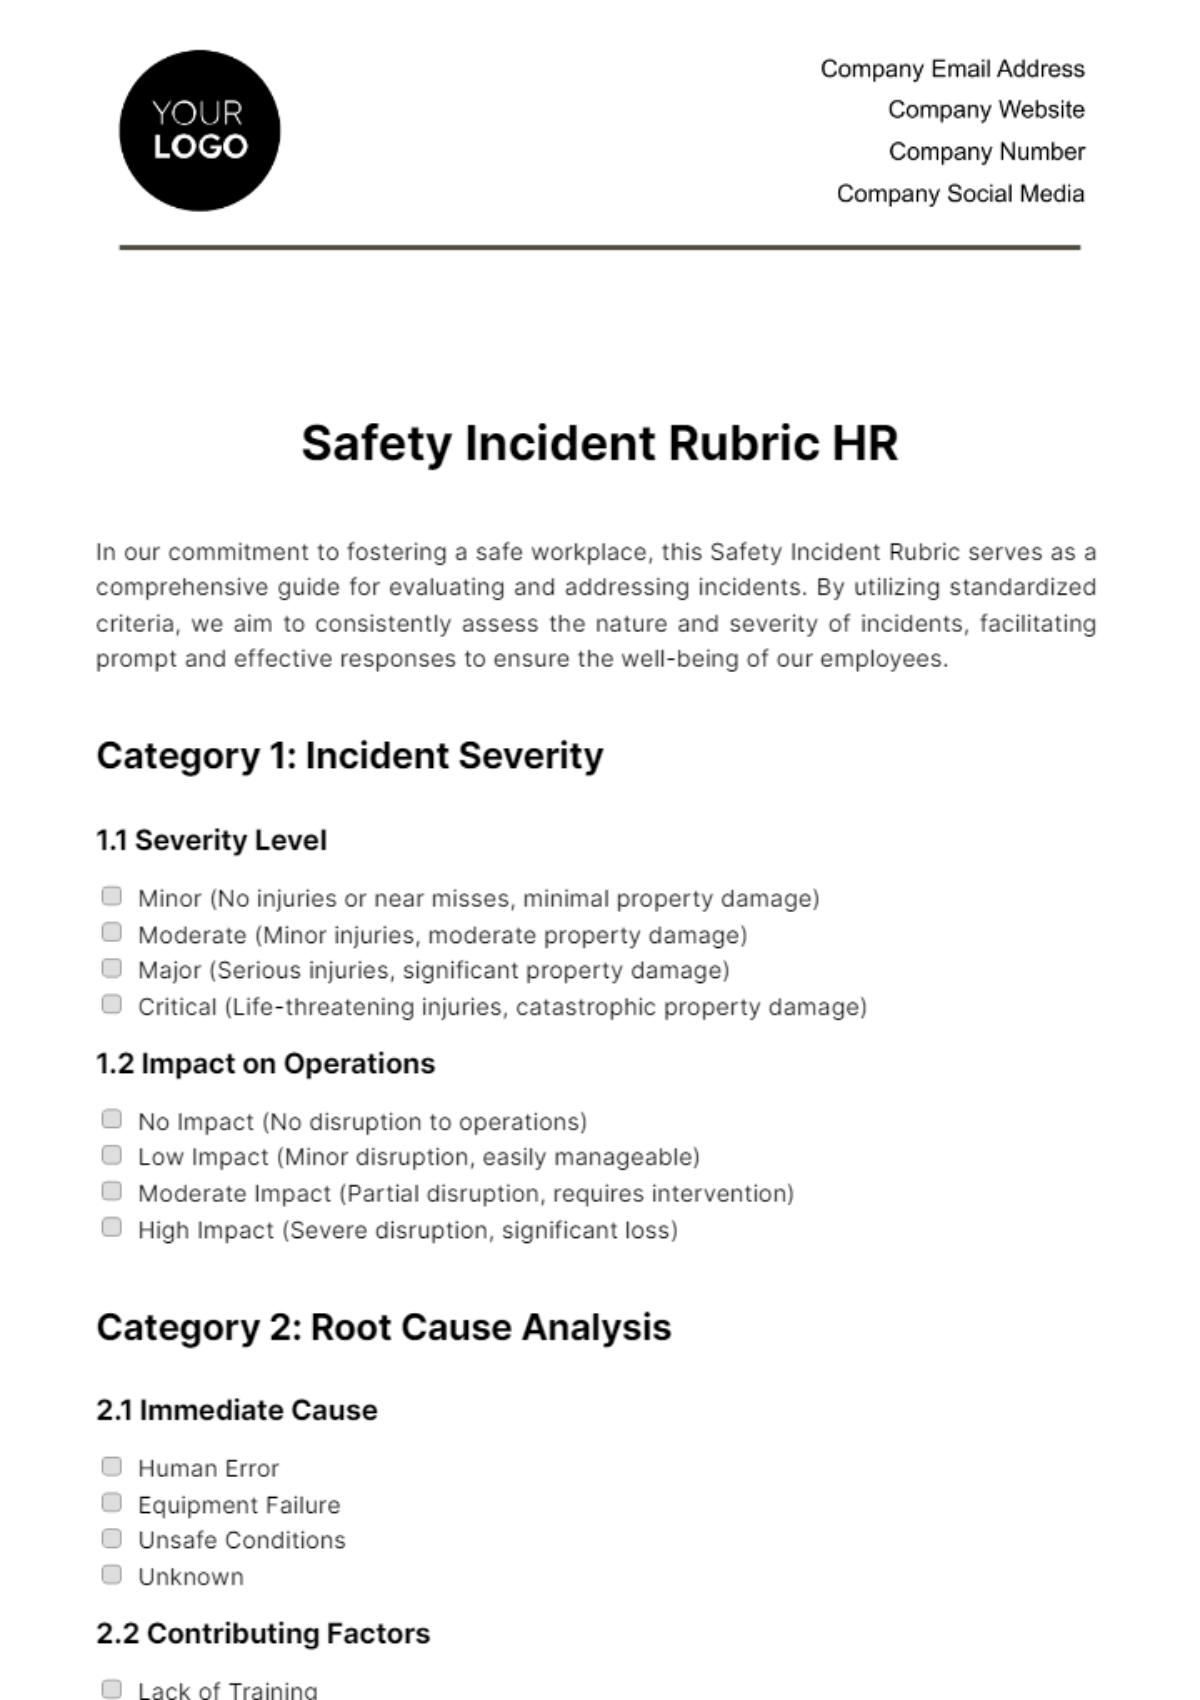 Safety Incident Rubric HR Template